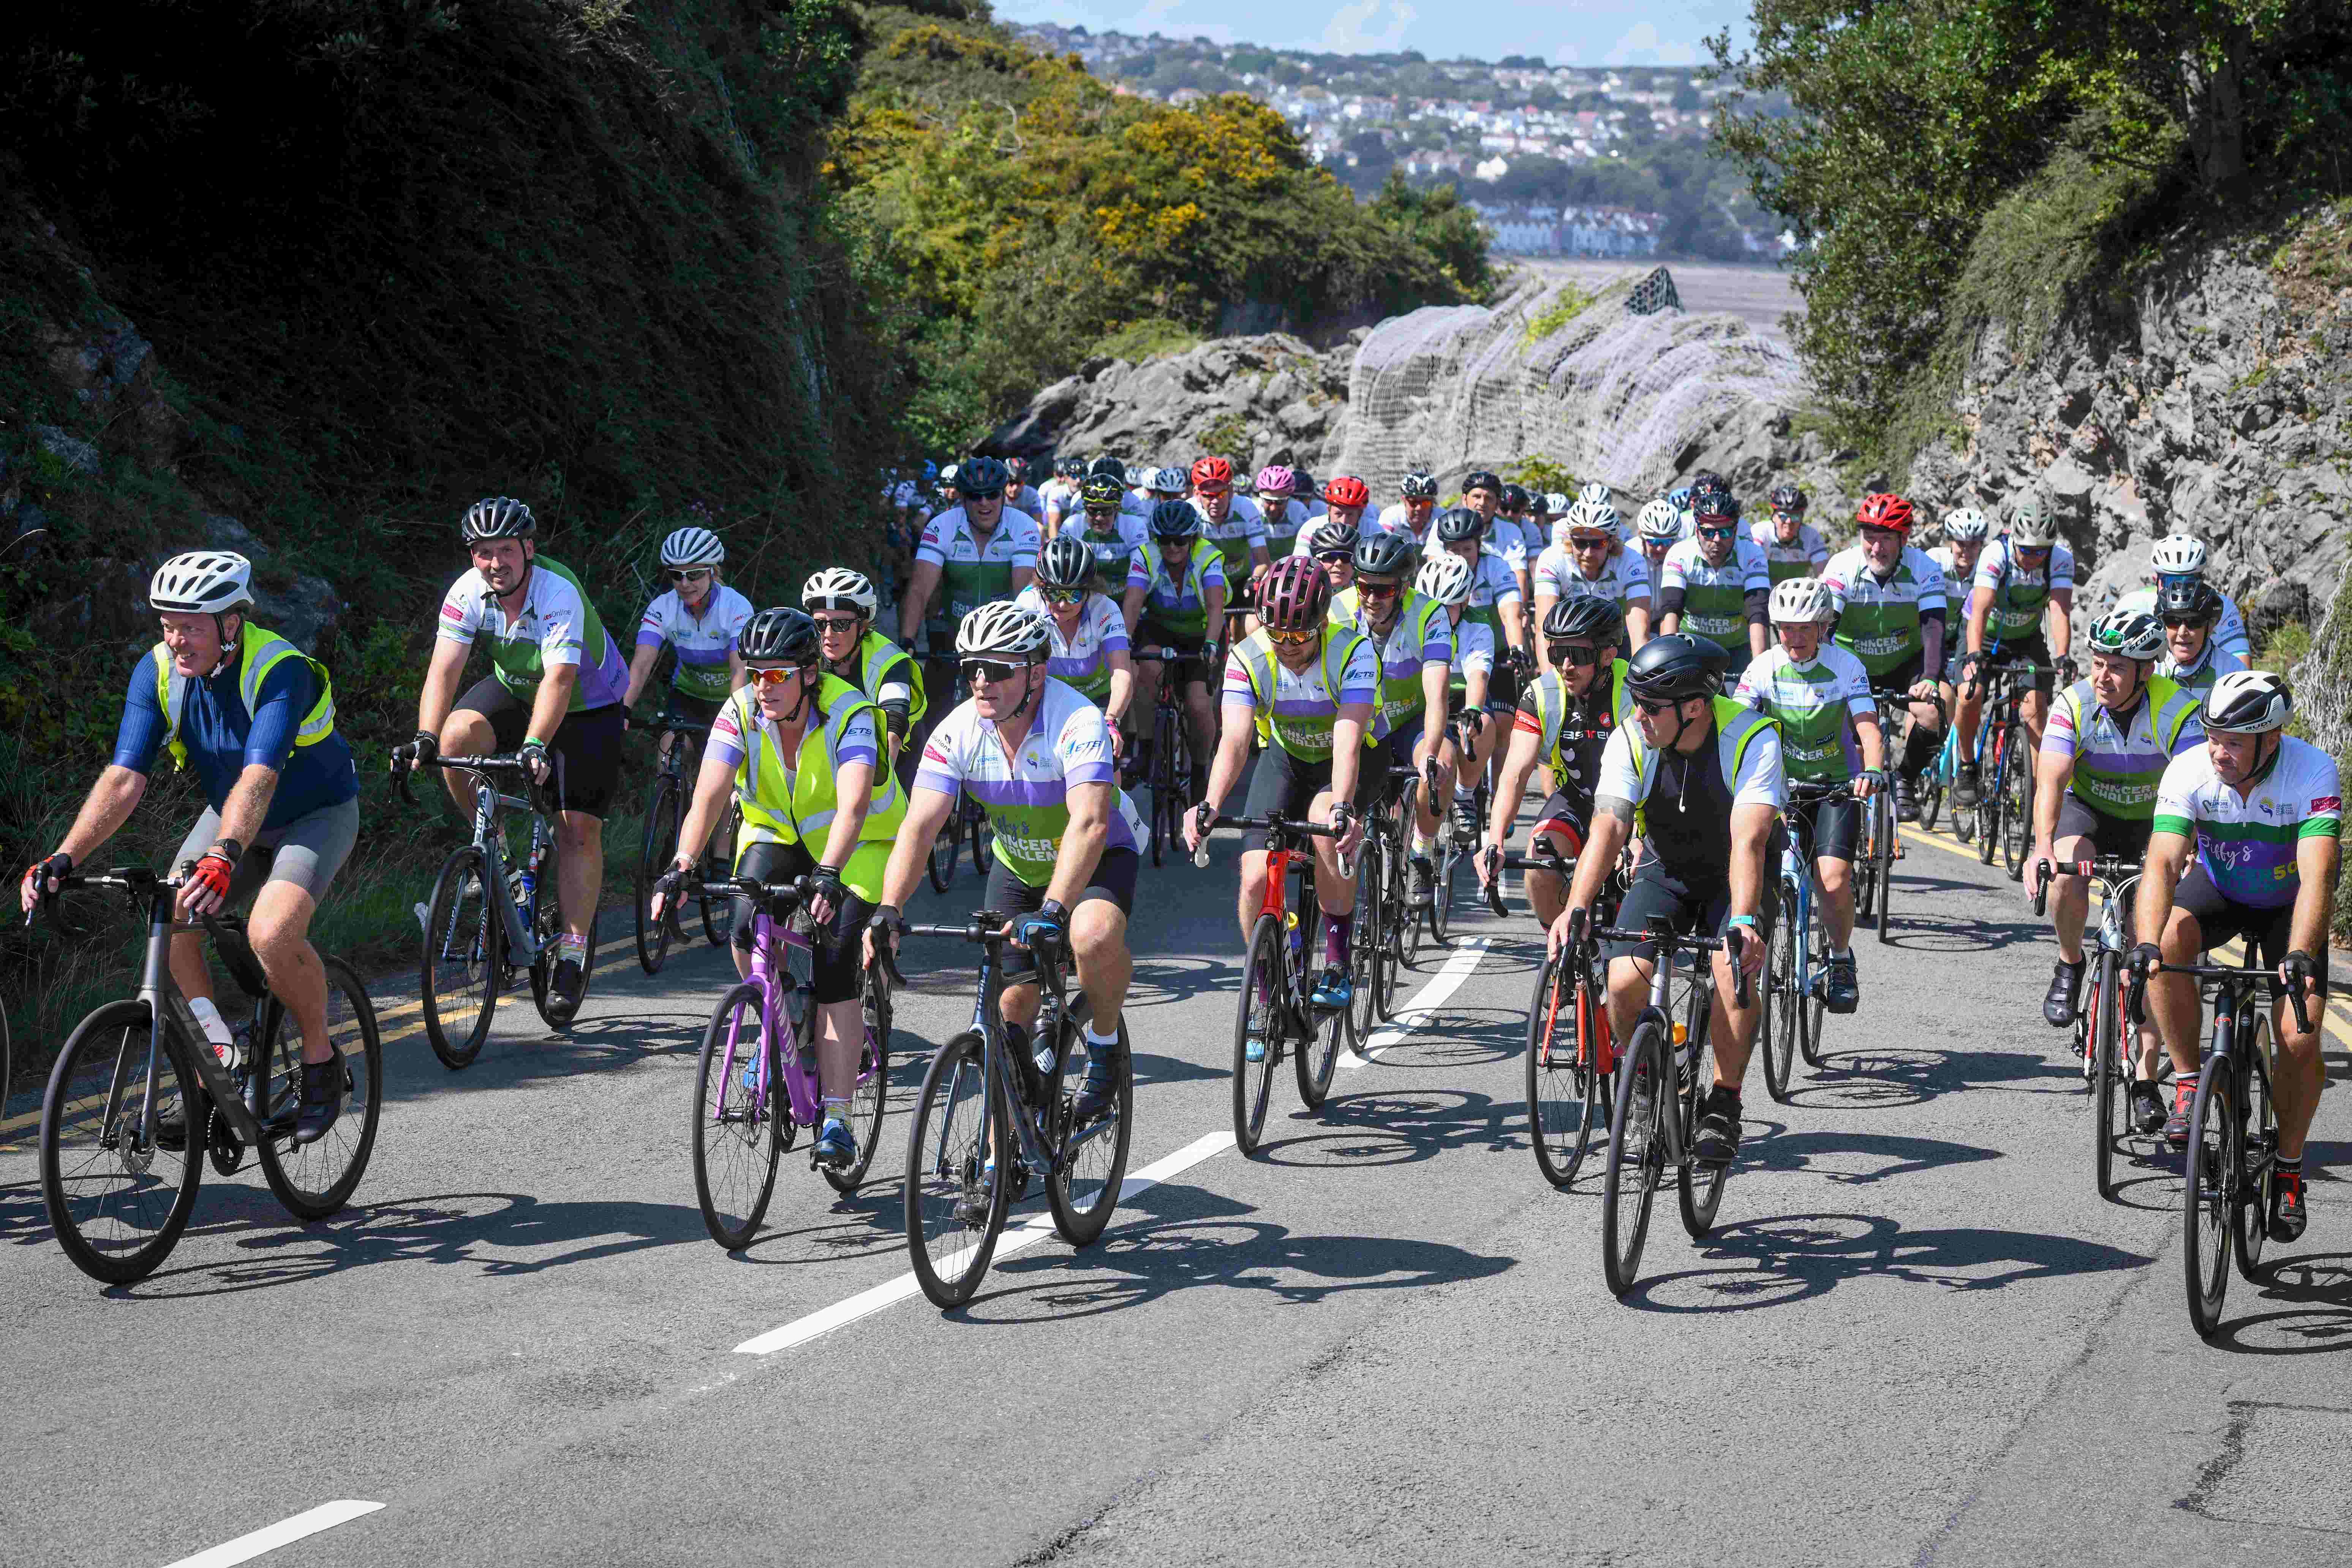 Some of the 600 riders ascend the hill leading towards the finish line in Bracelet Bay.